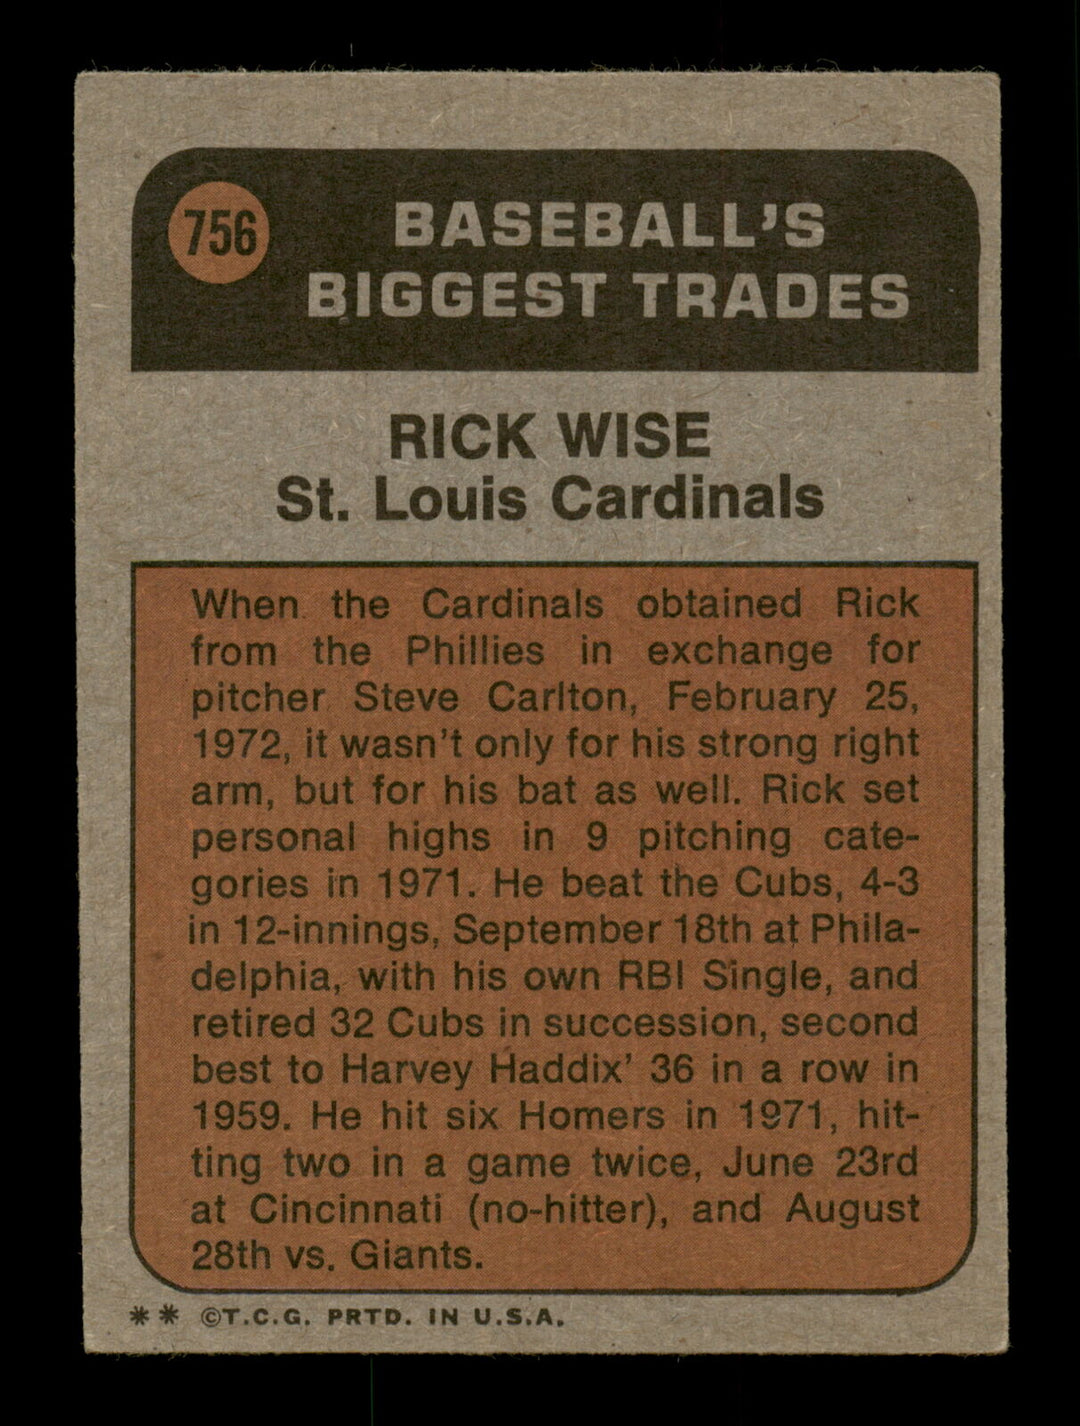 Rick Wise Autographed 1972 Topps Card #756 St. Louis Cardinals Traded 204260 Image 3